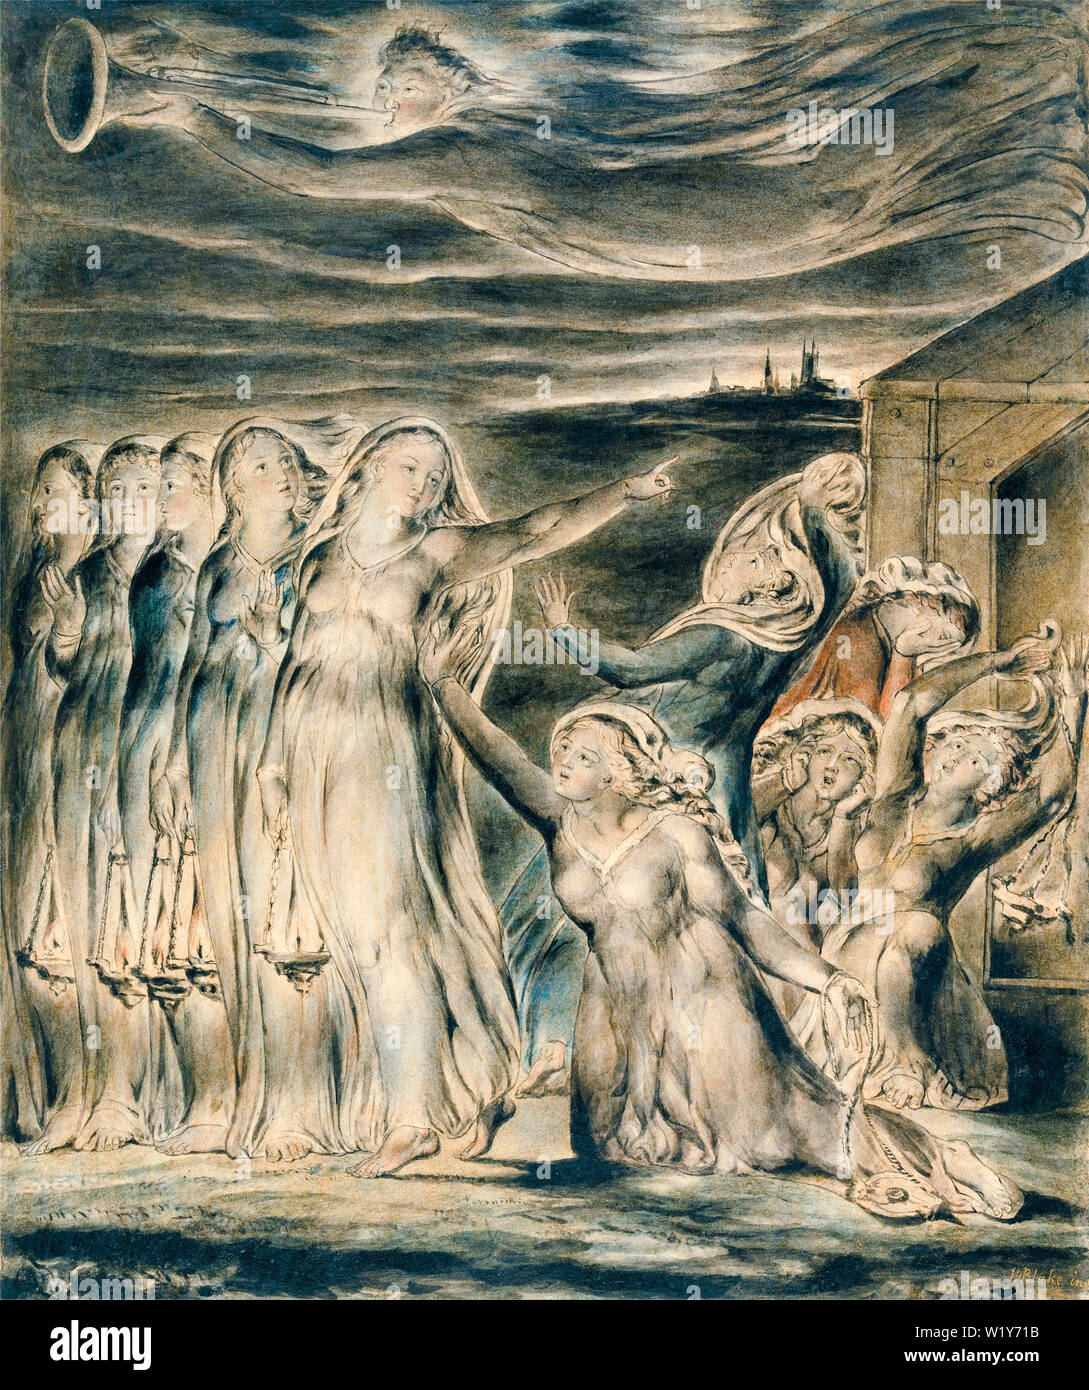 William Blake, The Parable of the Wise and Foolish Virgins, painting, circa 1825, pen and ink with watercolour, illustration Stock Photo